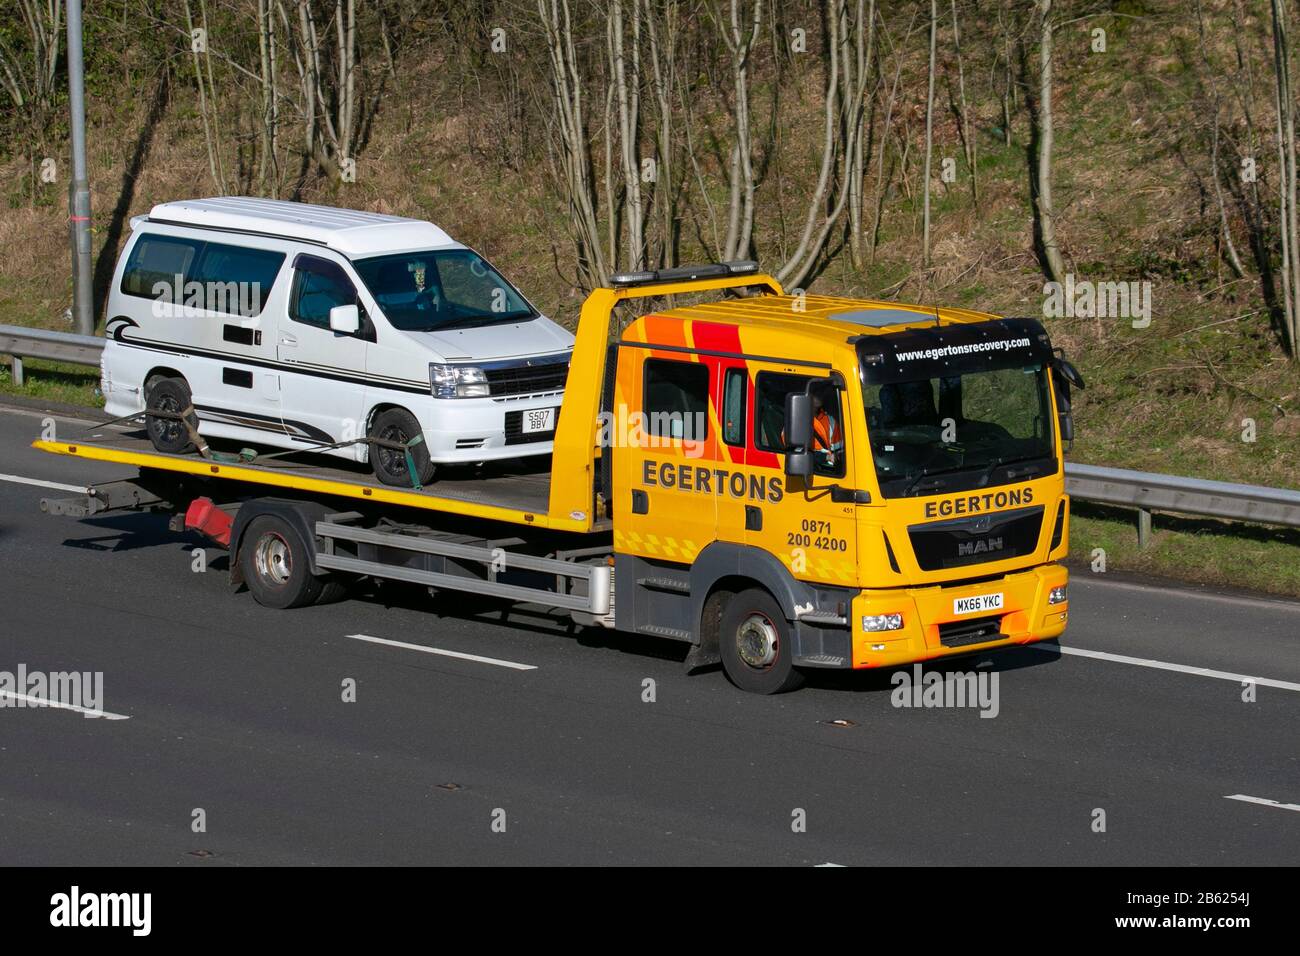 Egertons Breakdon Recovery;  Haulage delivery trucks, lorry, transportation, truck, cargo, MAN vehicle, delivery, commercial transport, industry, supply chain freight, on the M6 at Lancaster, UK Stock Photo